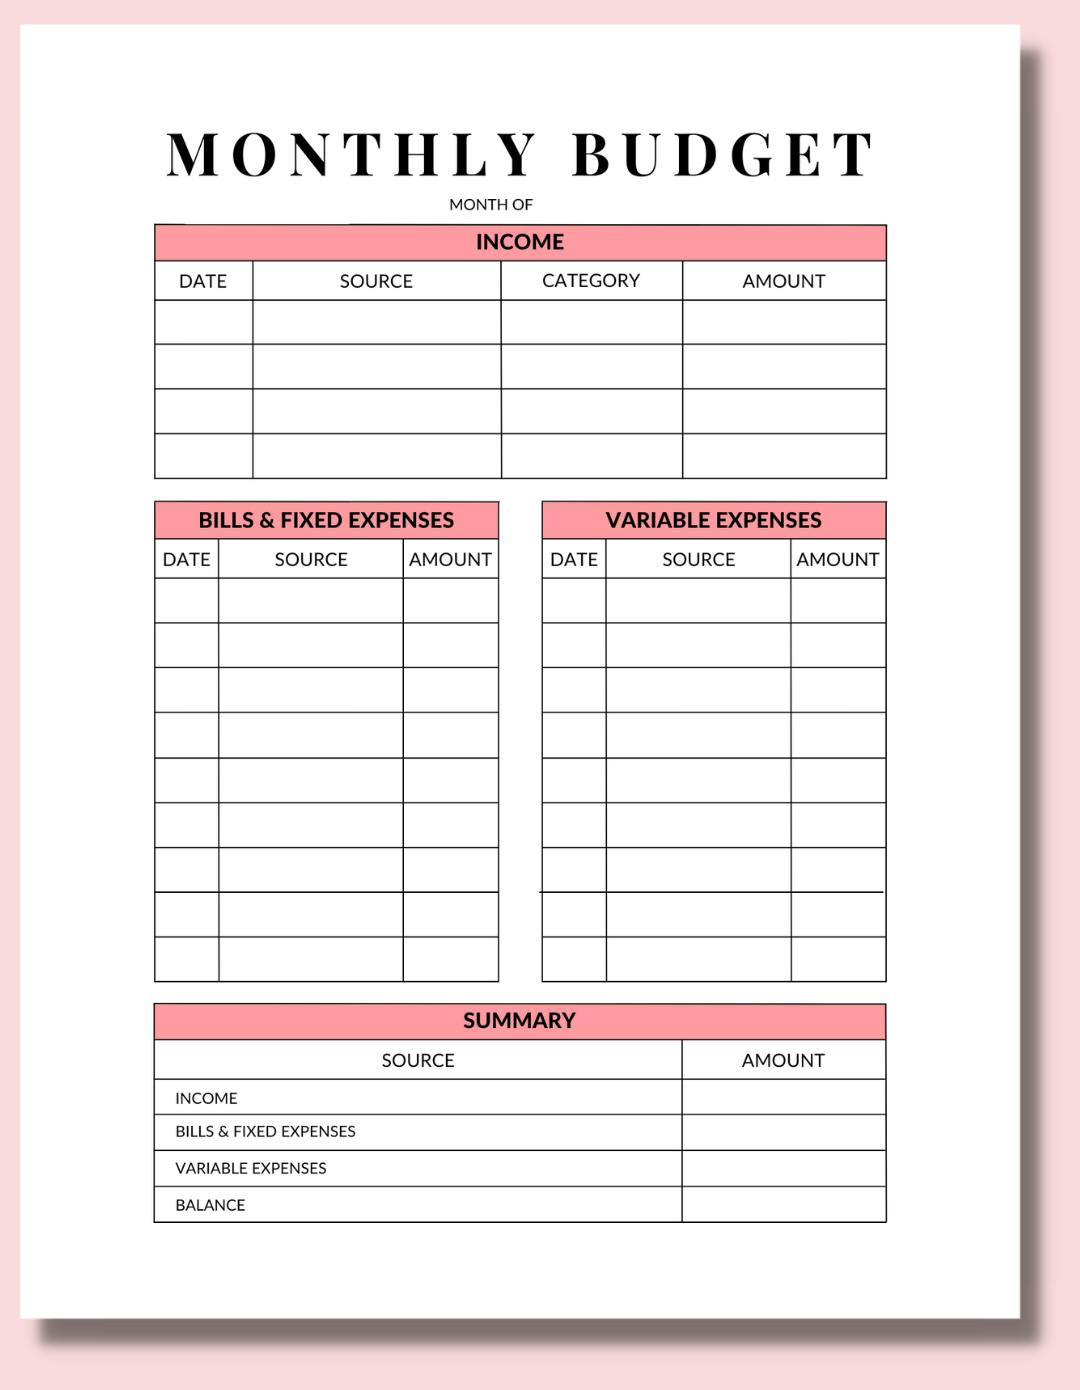 get-my-free-monthly-budget-template